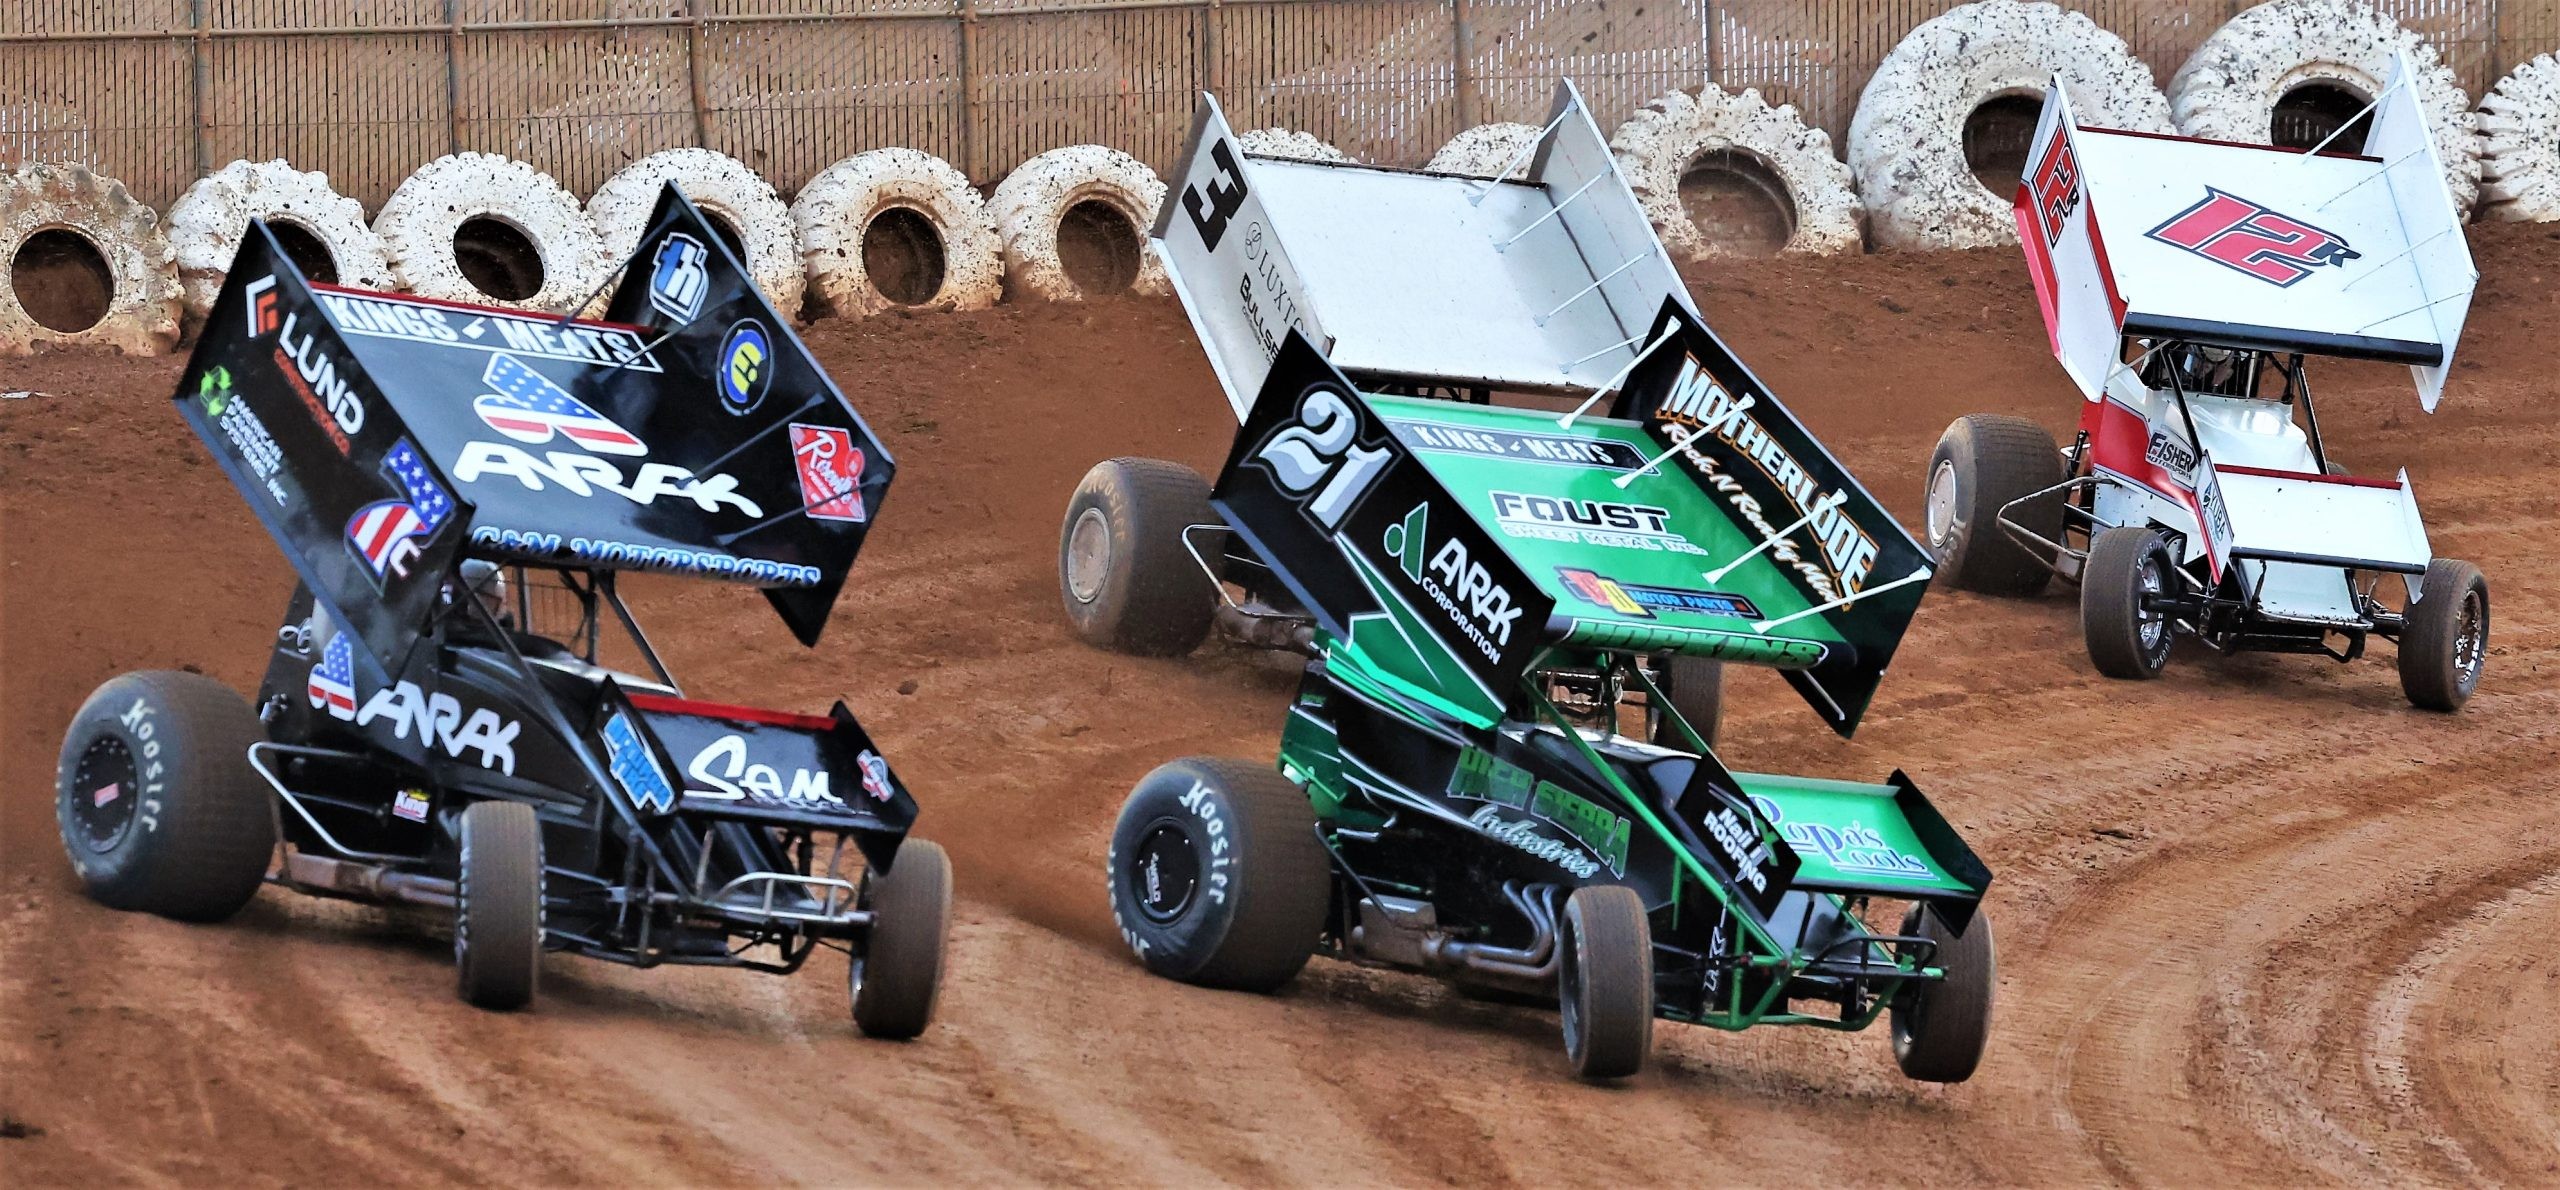 Championship season continues at Placerville Saturday